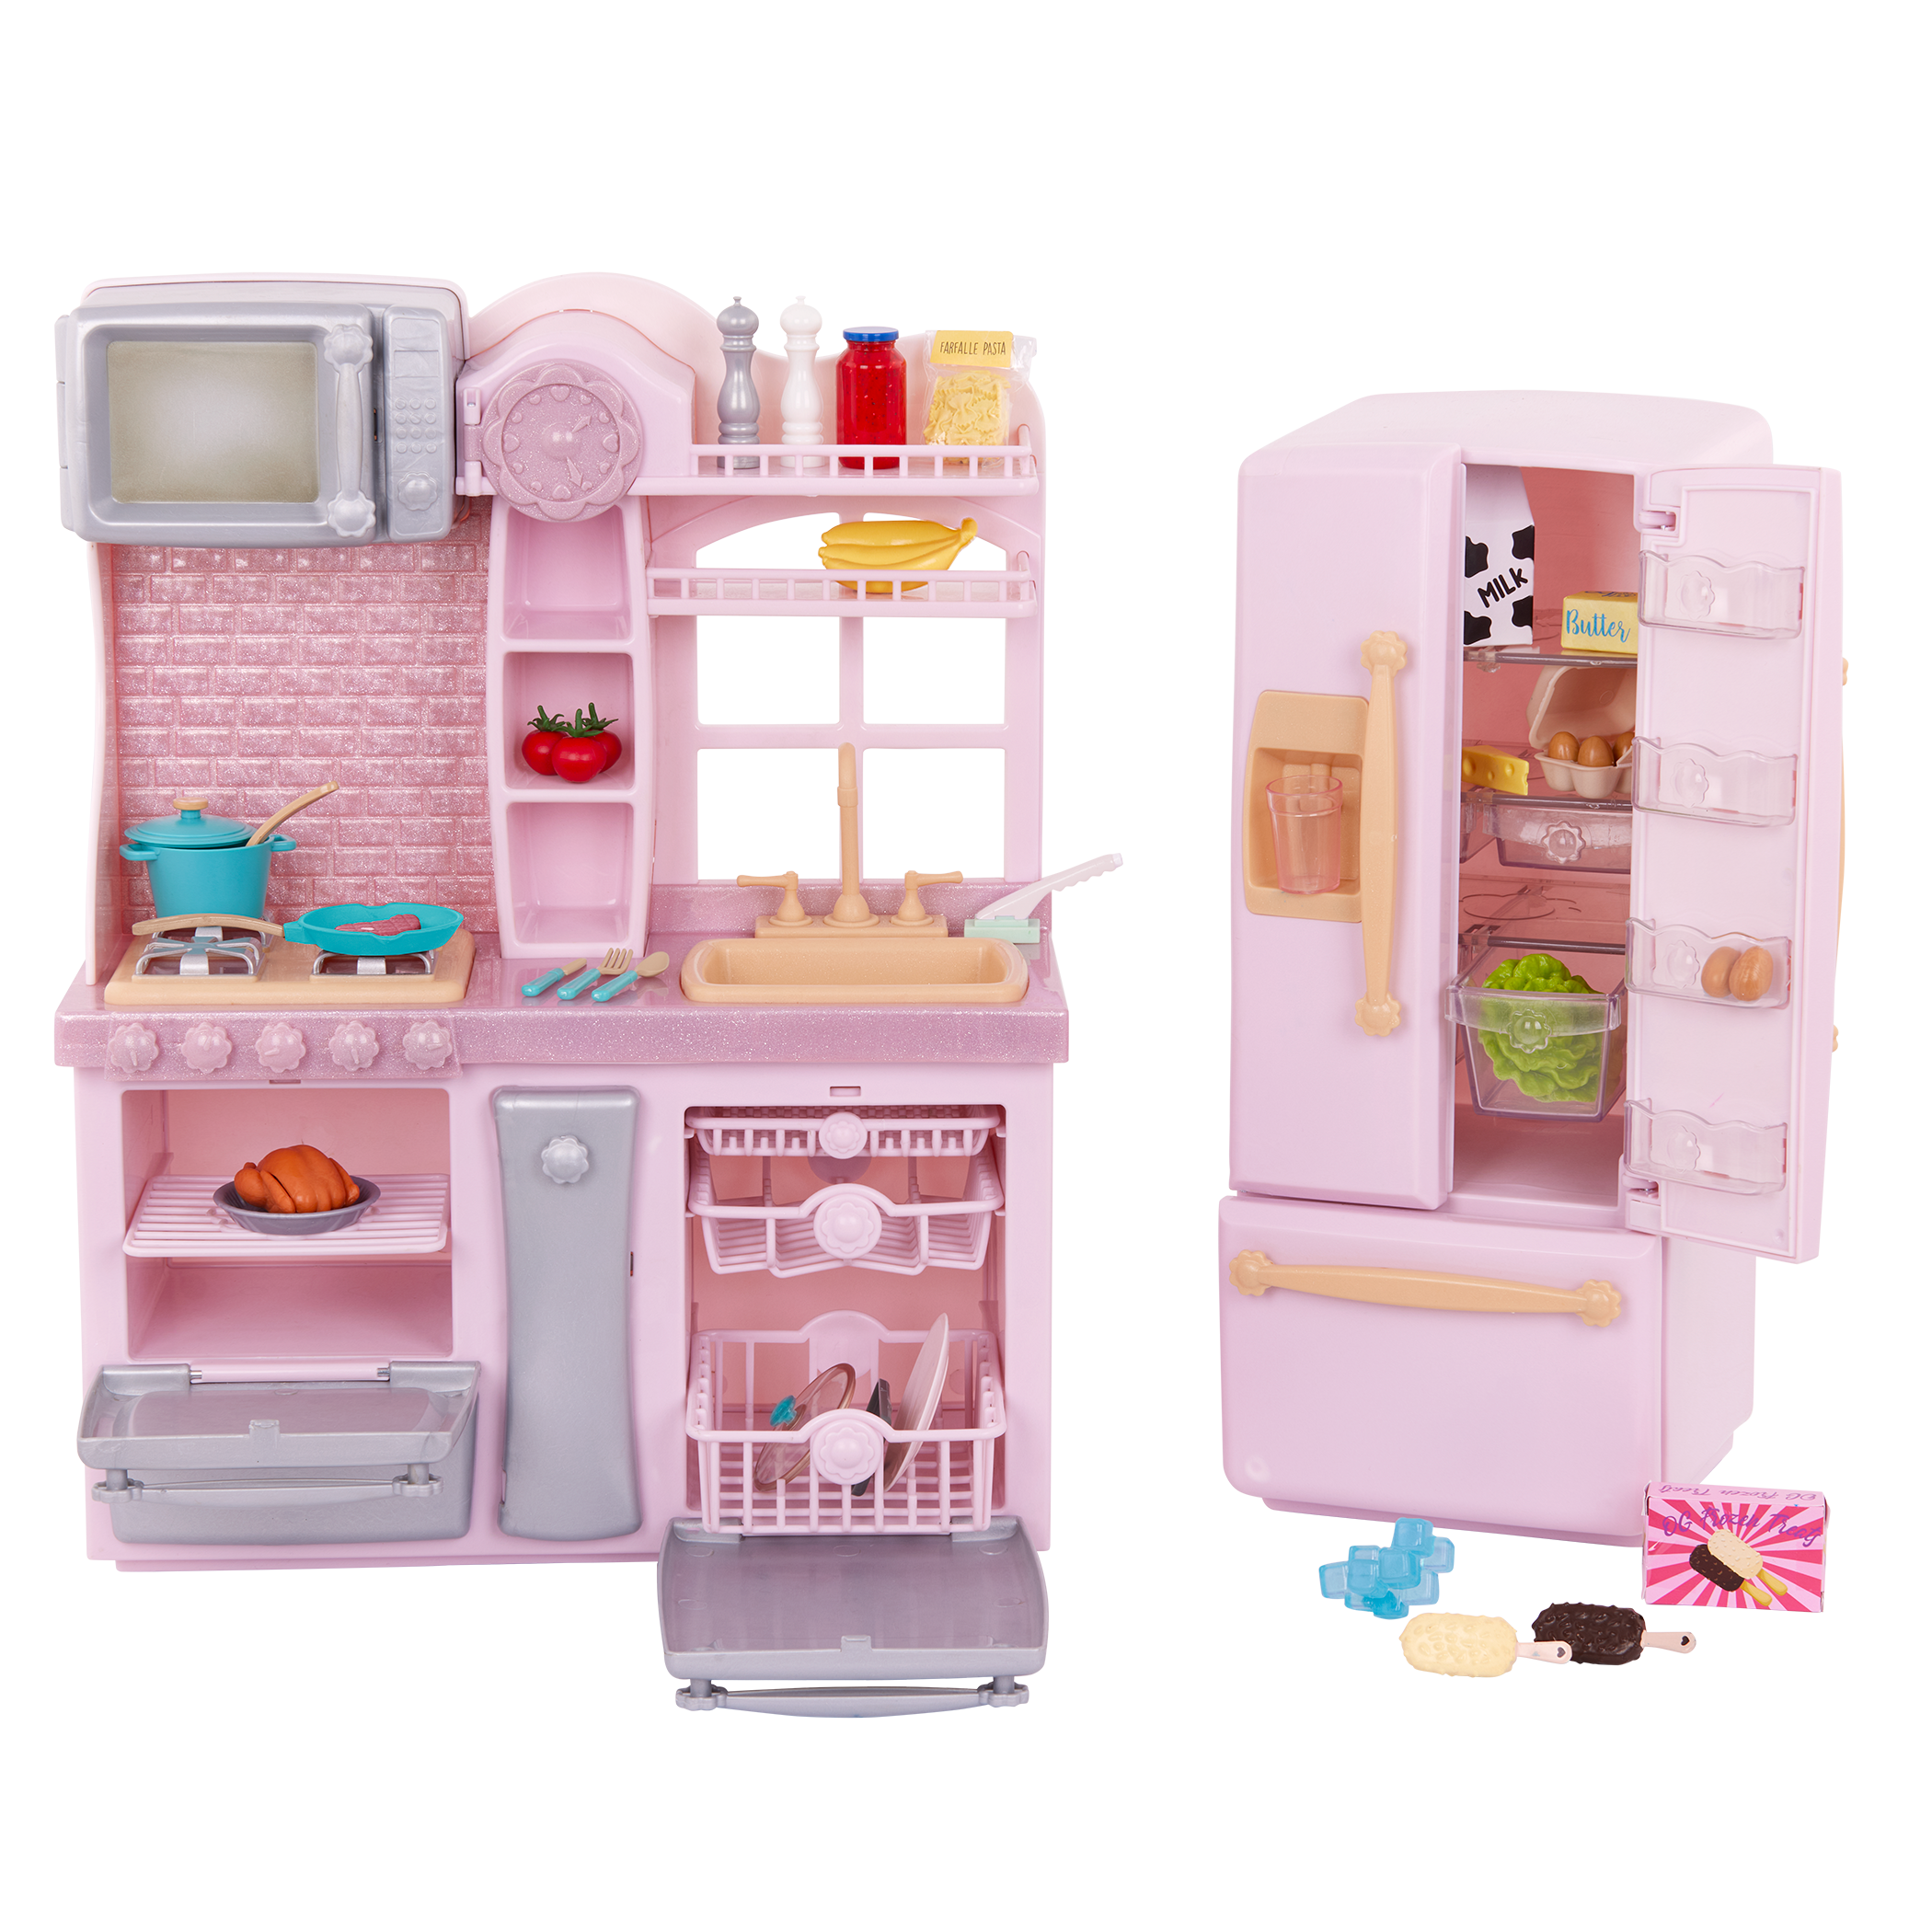 Our Generation Pink Gourmet Kitchen Playset for 46 cm Dolls